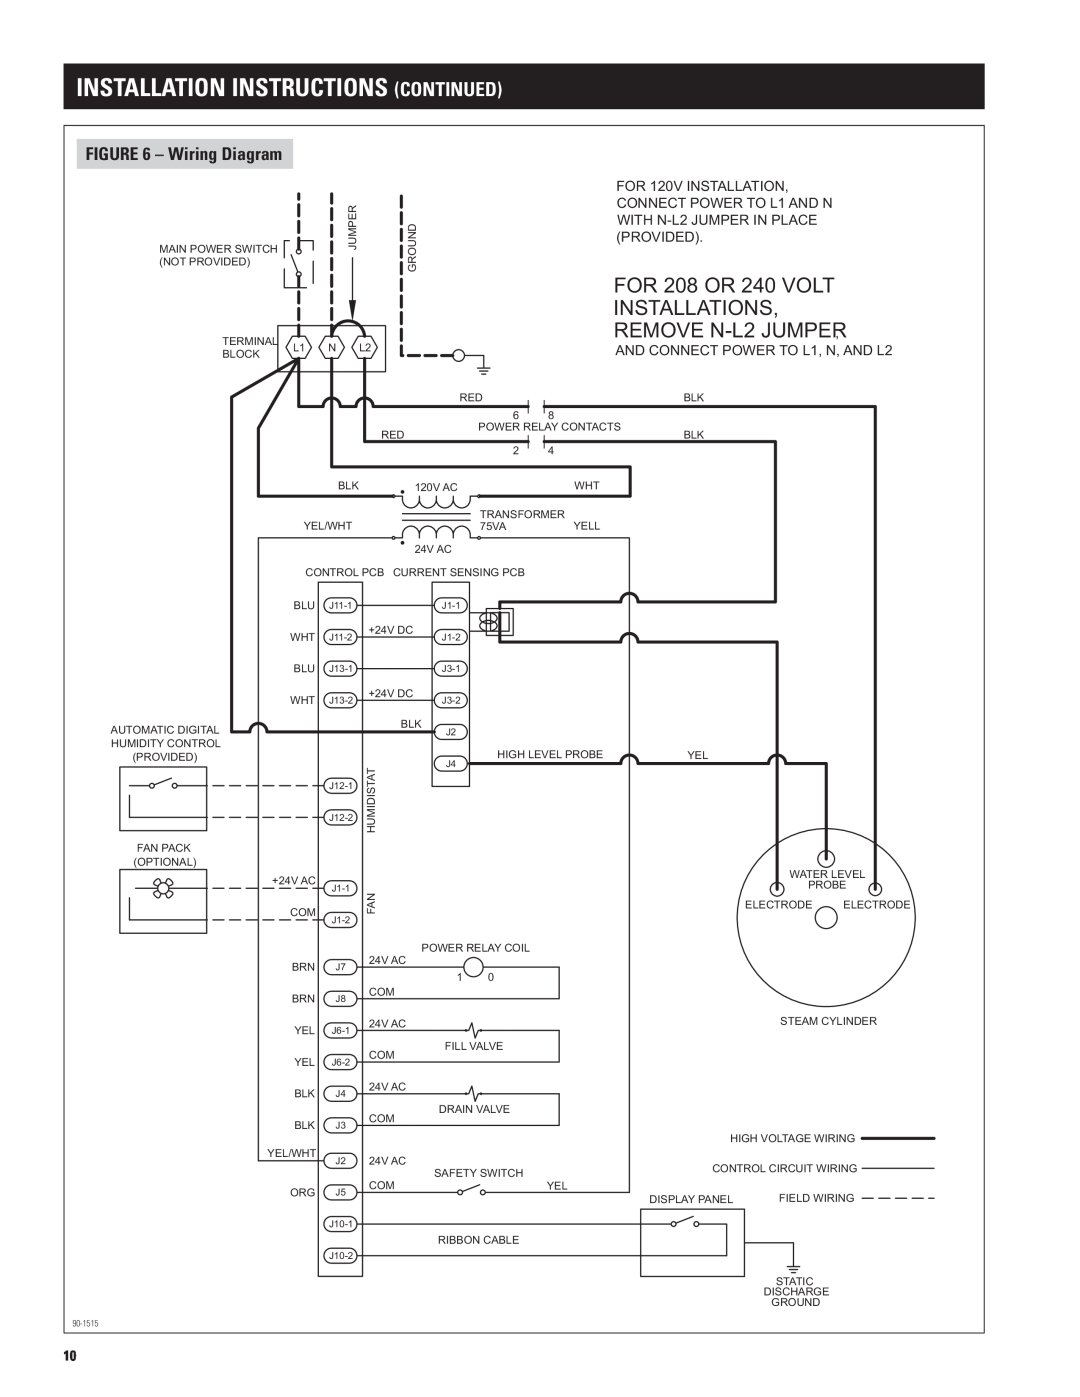 Aprilaire model 800 specifications FOR 208 OR 240 VOLT INSTALLATIONS REMOVE N-L2 JUMPER, Wiring Diagram 